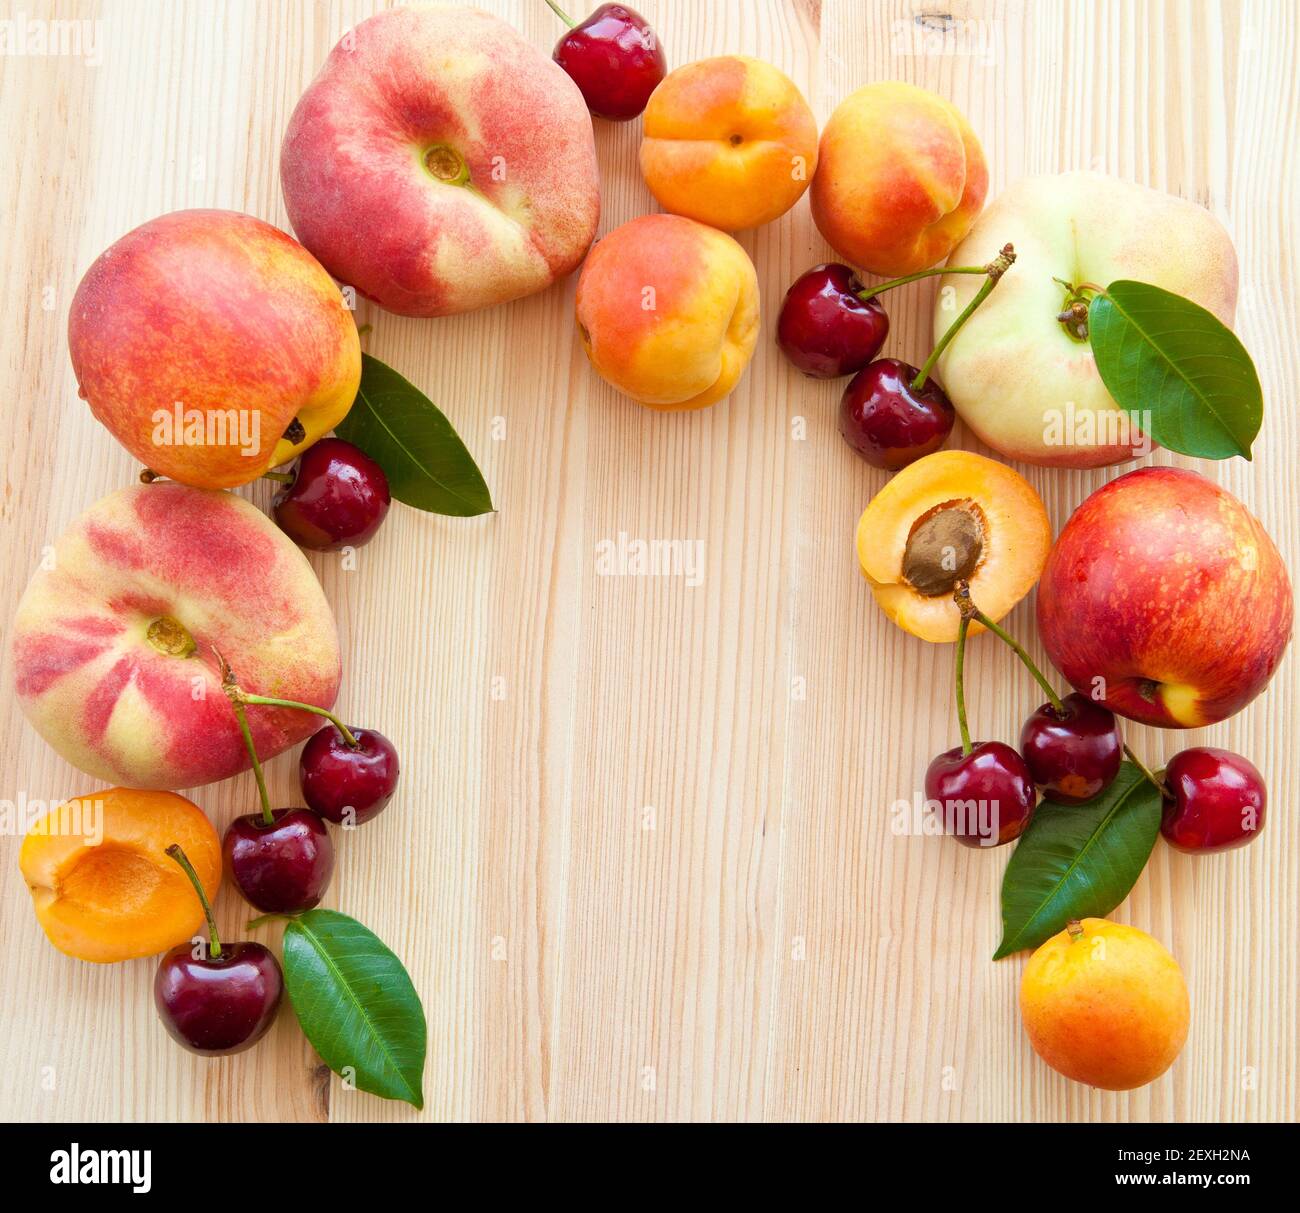 Background with fresh stone fruit, peaches, cherries and apricots Stock Photo